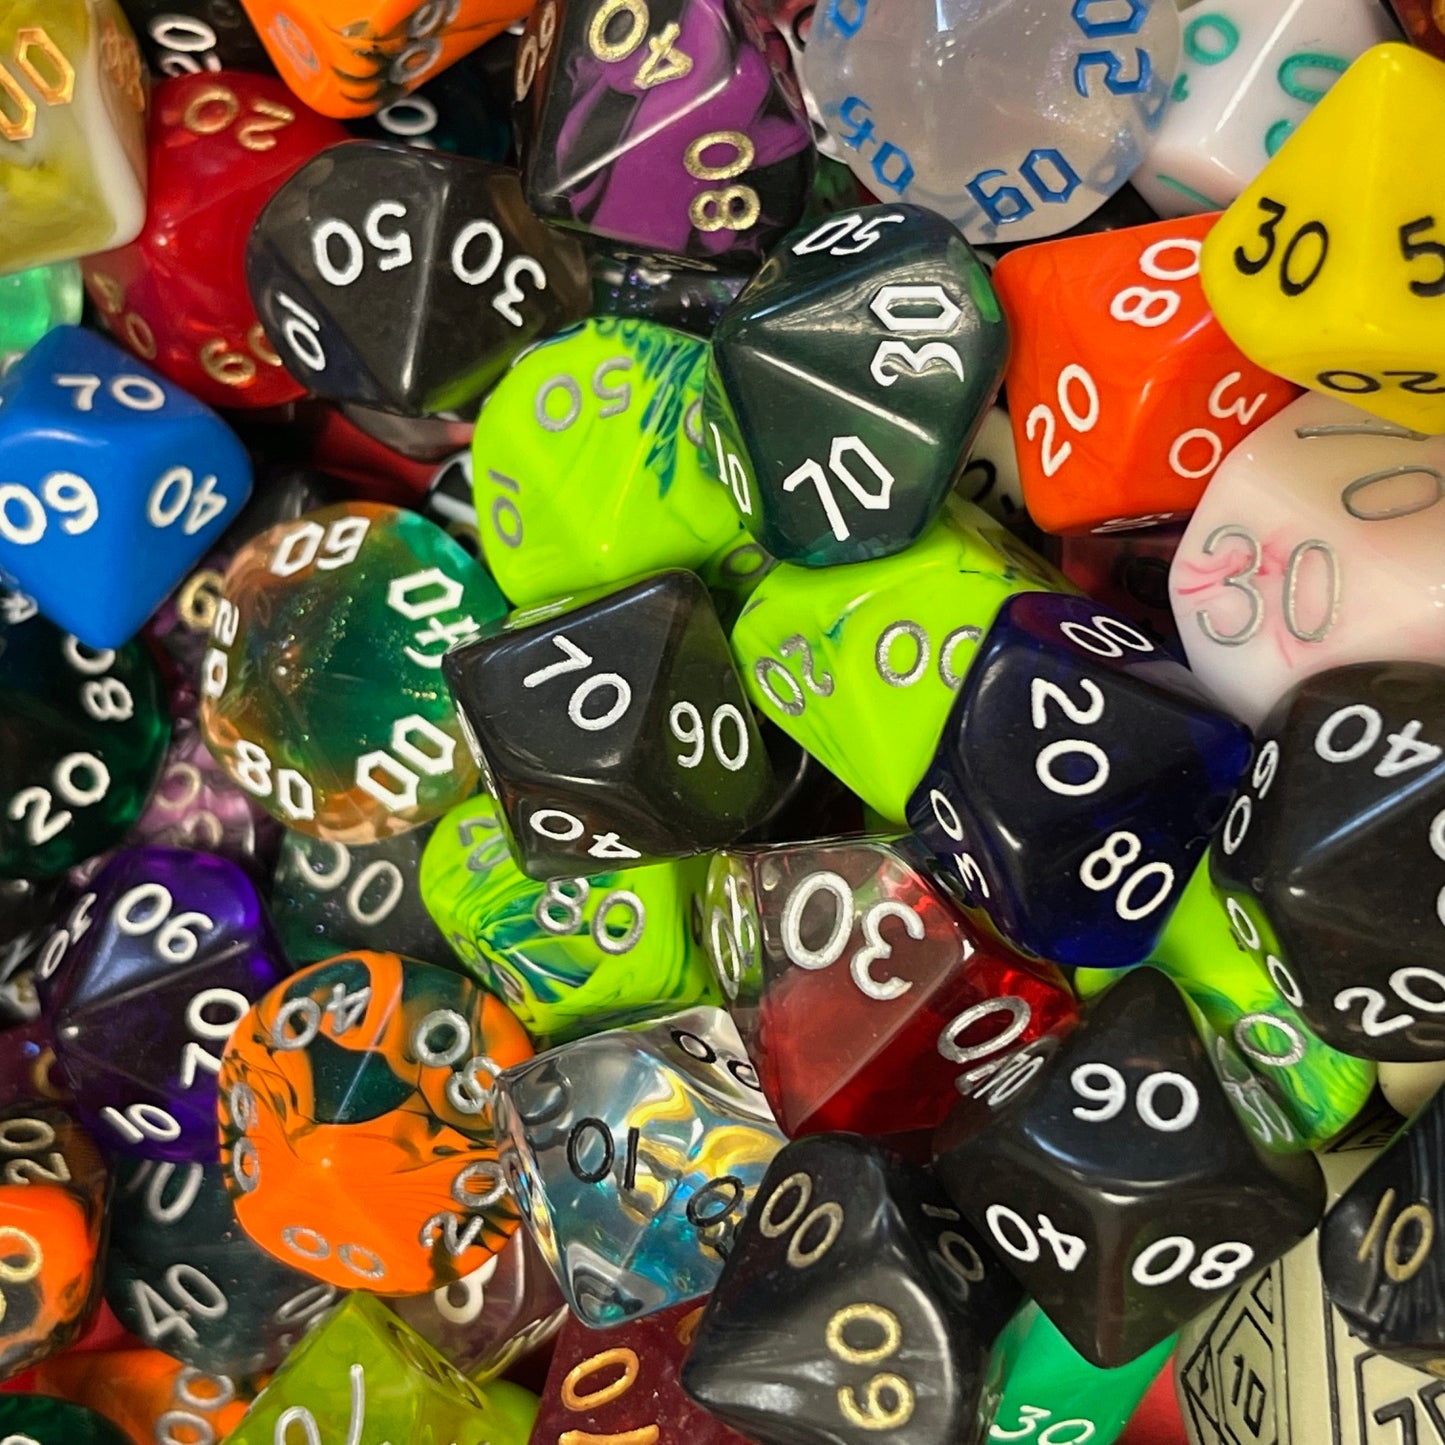 Random D100 TTRPG dice sets for DND and role playing games and dice goblin collectors